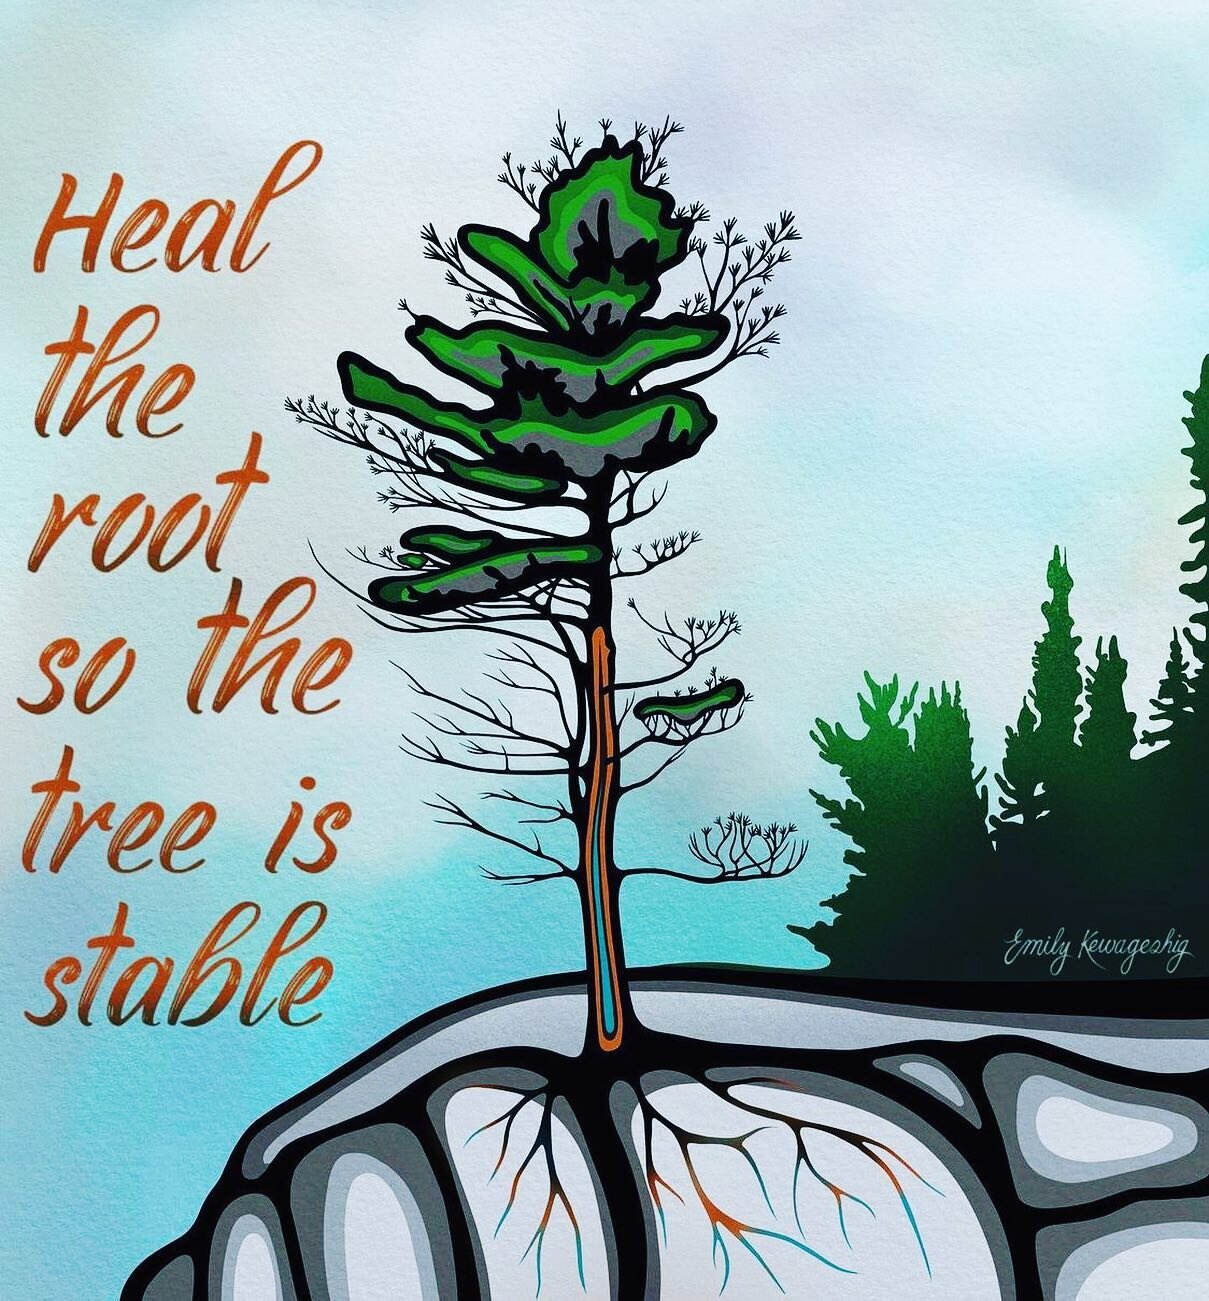 Heal the root so the tree is stable. Thank you @emilykewageshig we couldn&rsquo;t have said it any better ourselves. We all have roots to work on, because without them, there's no growth. Life's true beauty comes from our inner growth. 

 #transition